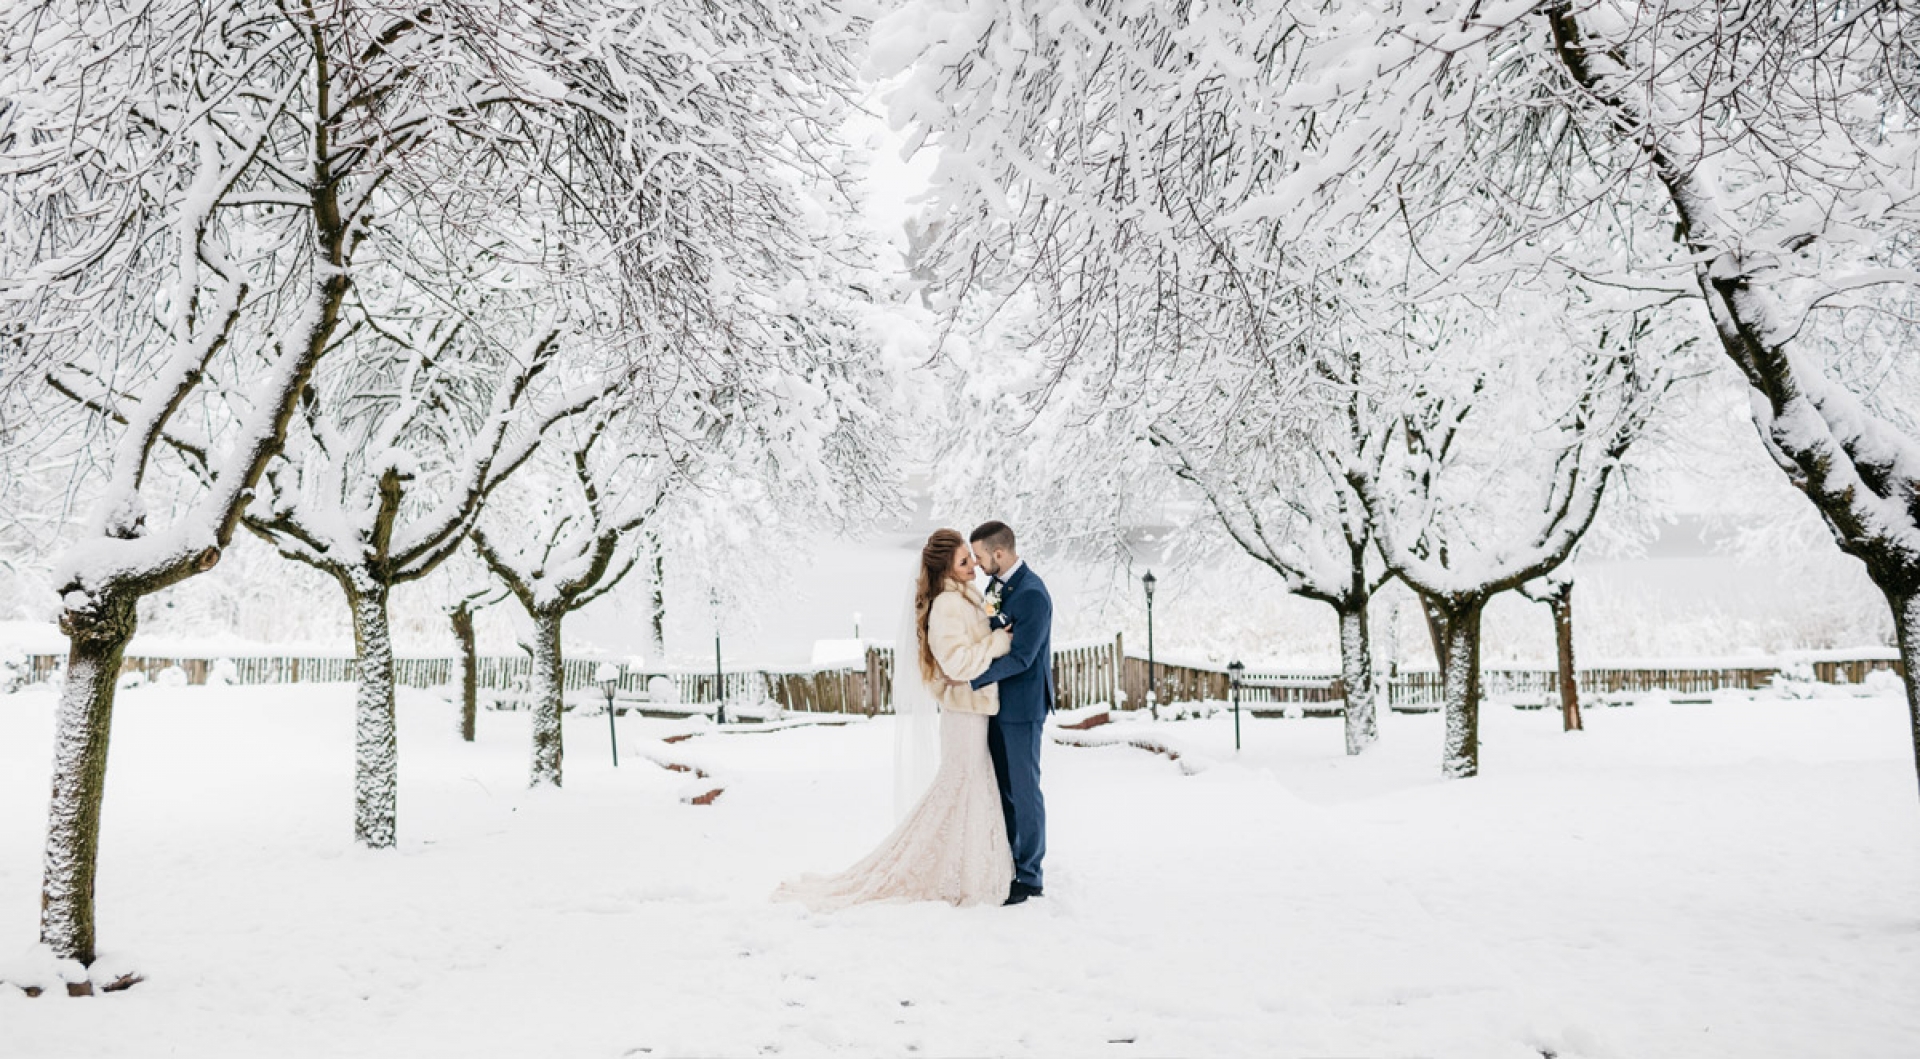 Winter Wedding Ceremony and Reception Tips